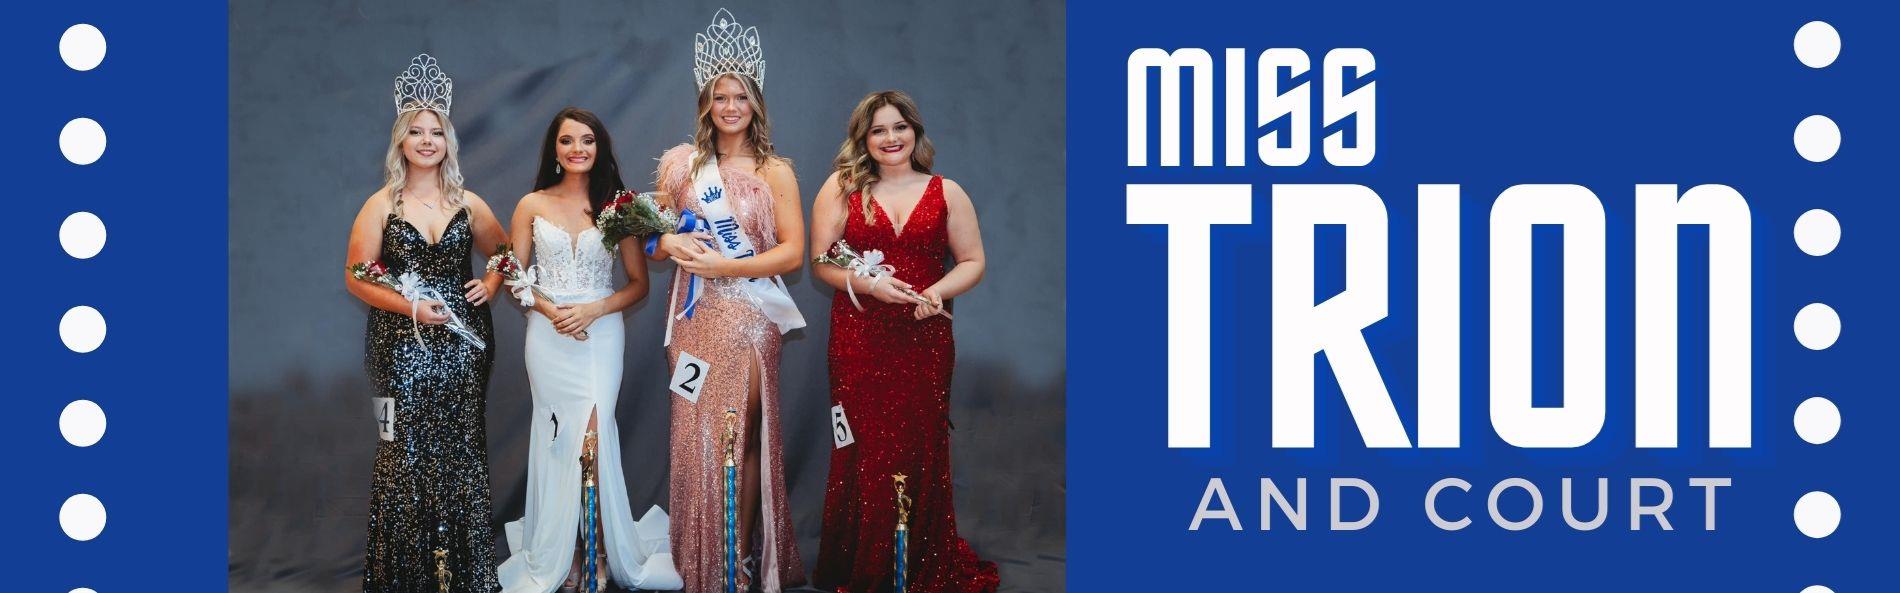 CONGRATULATIONS TO MISS TRION